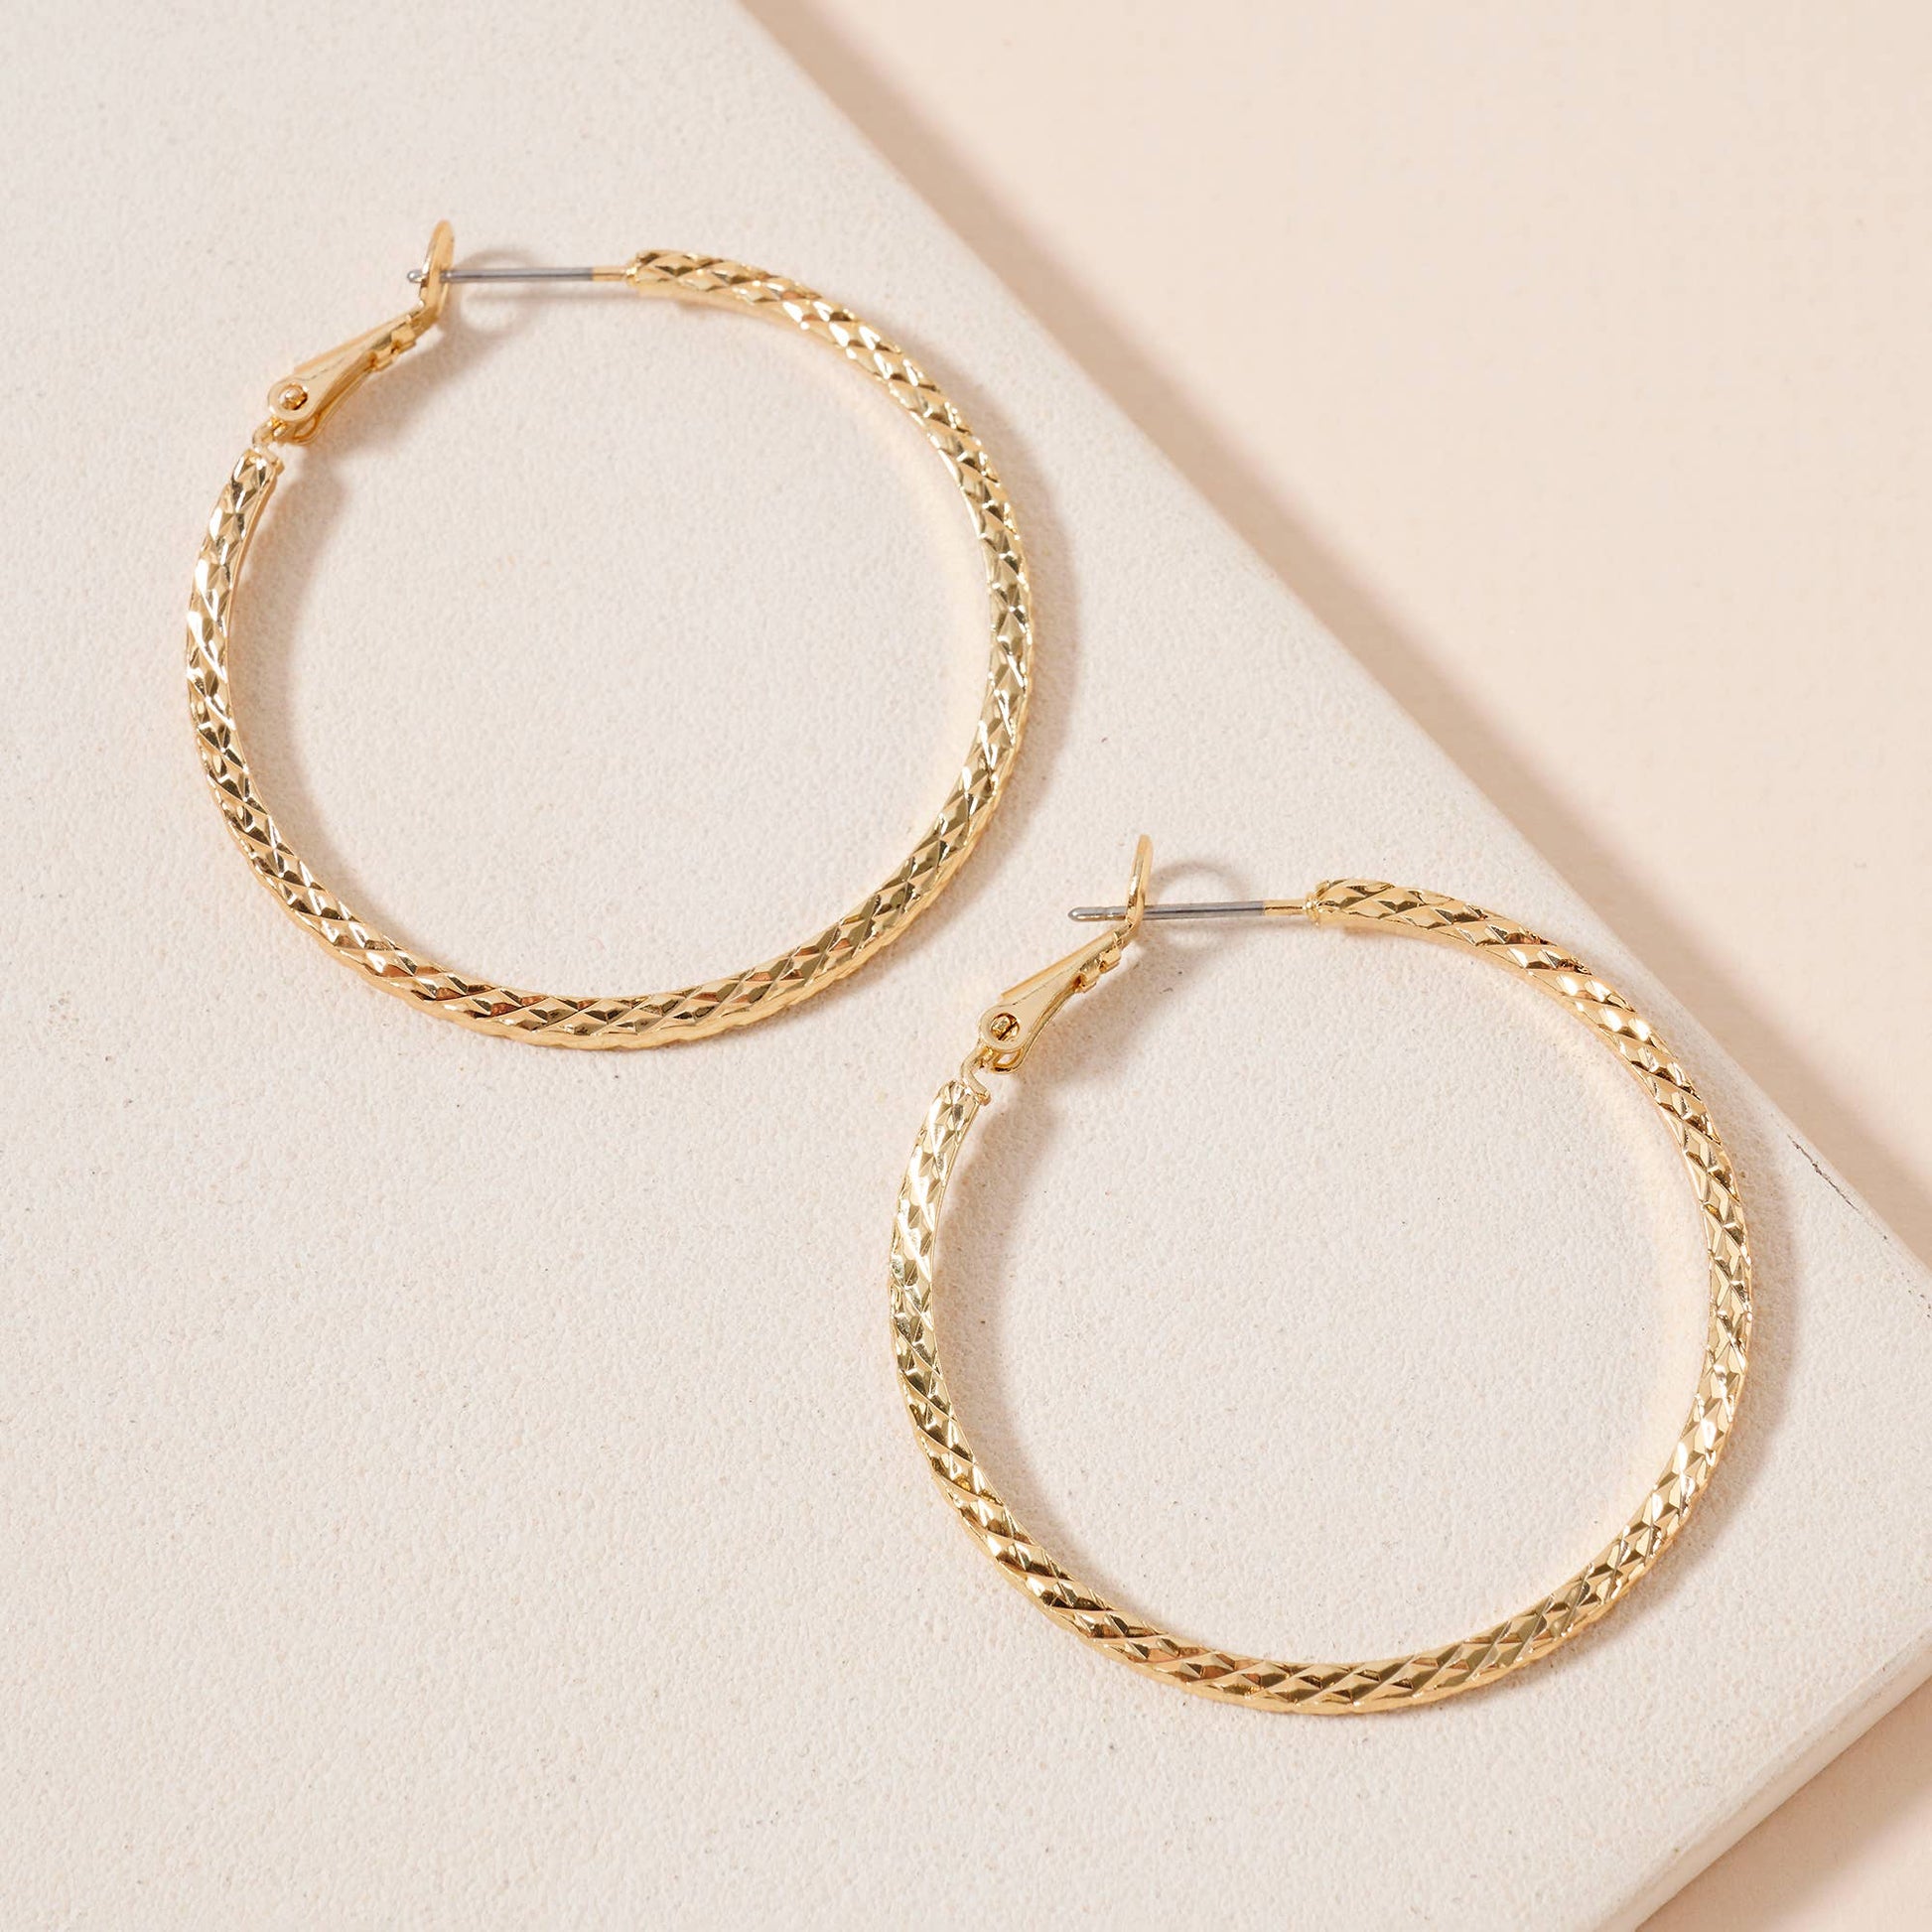 Textured Gold Hoop Earrings - Red Fox Boutique